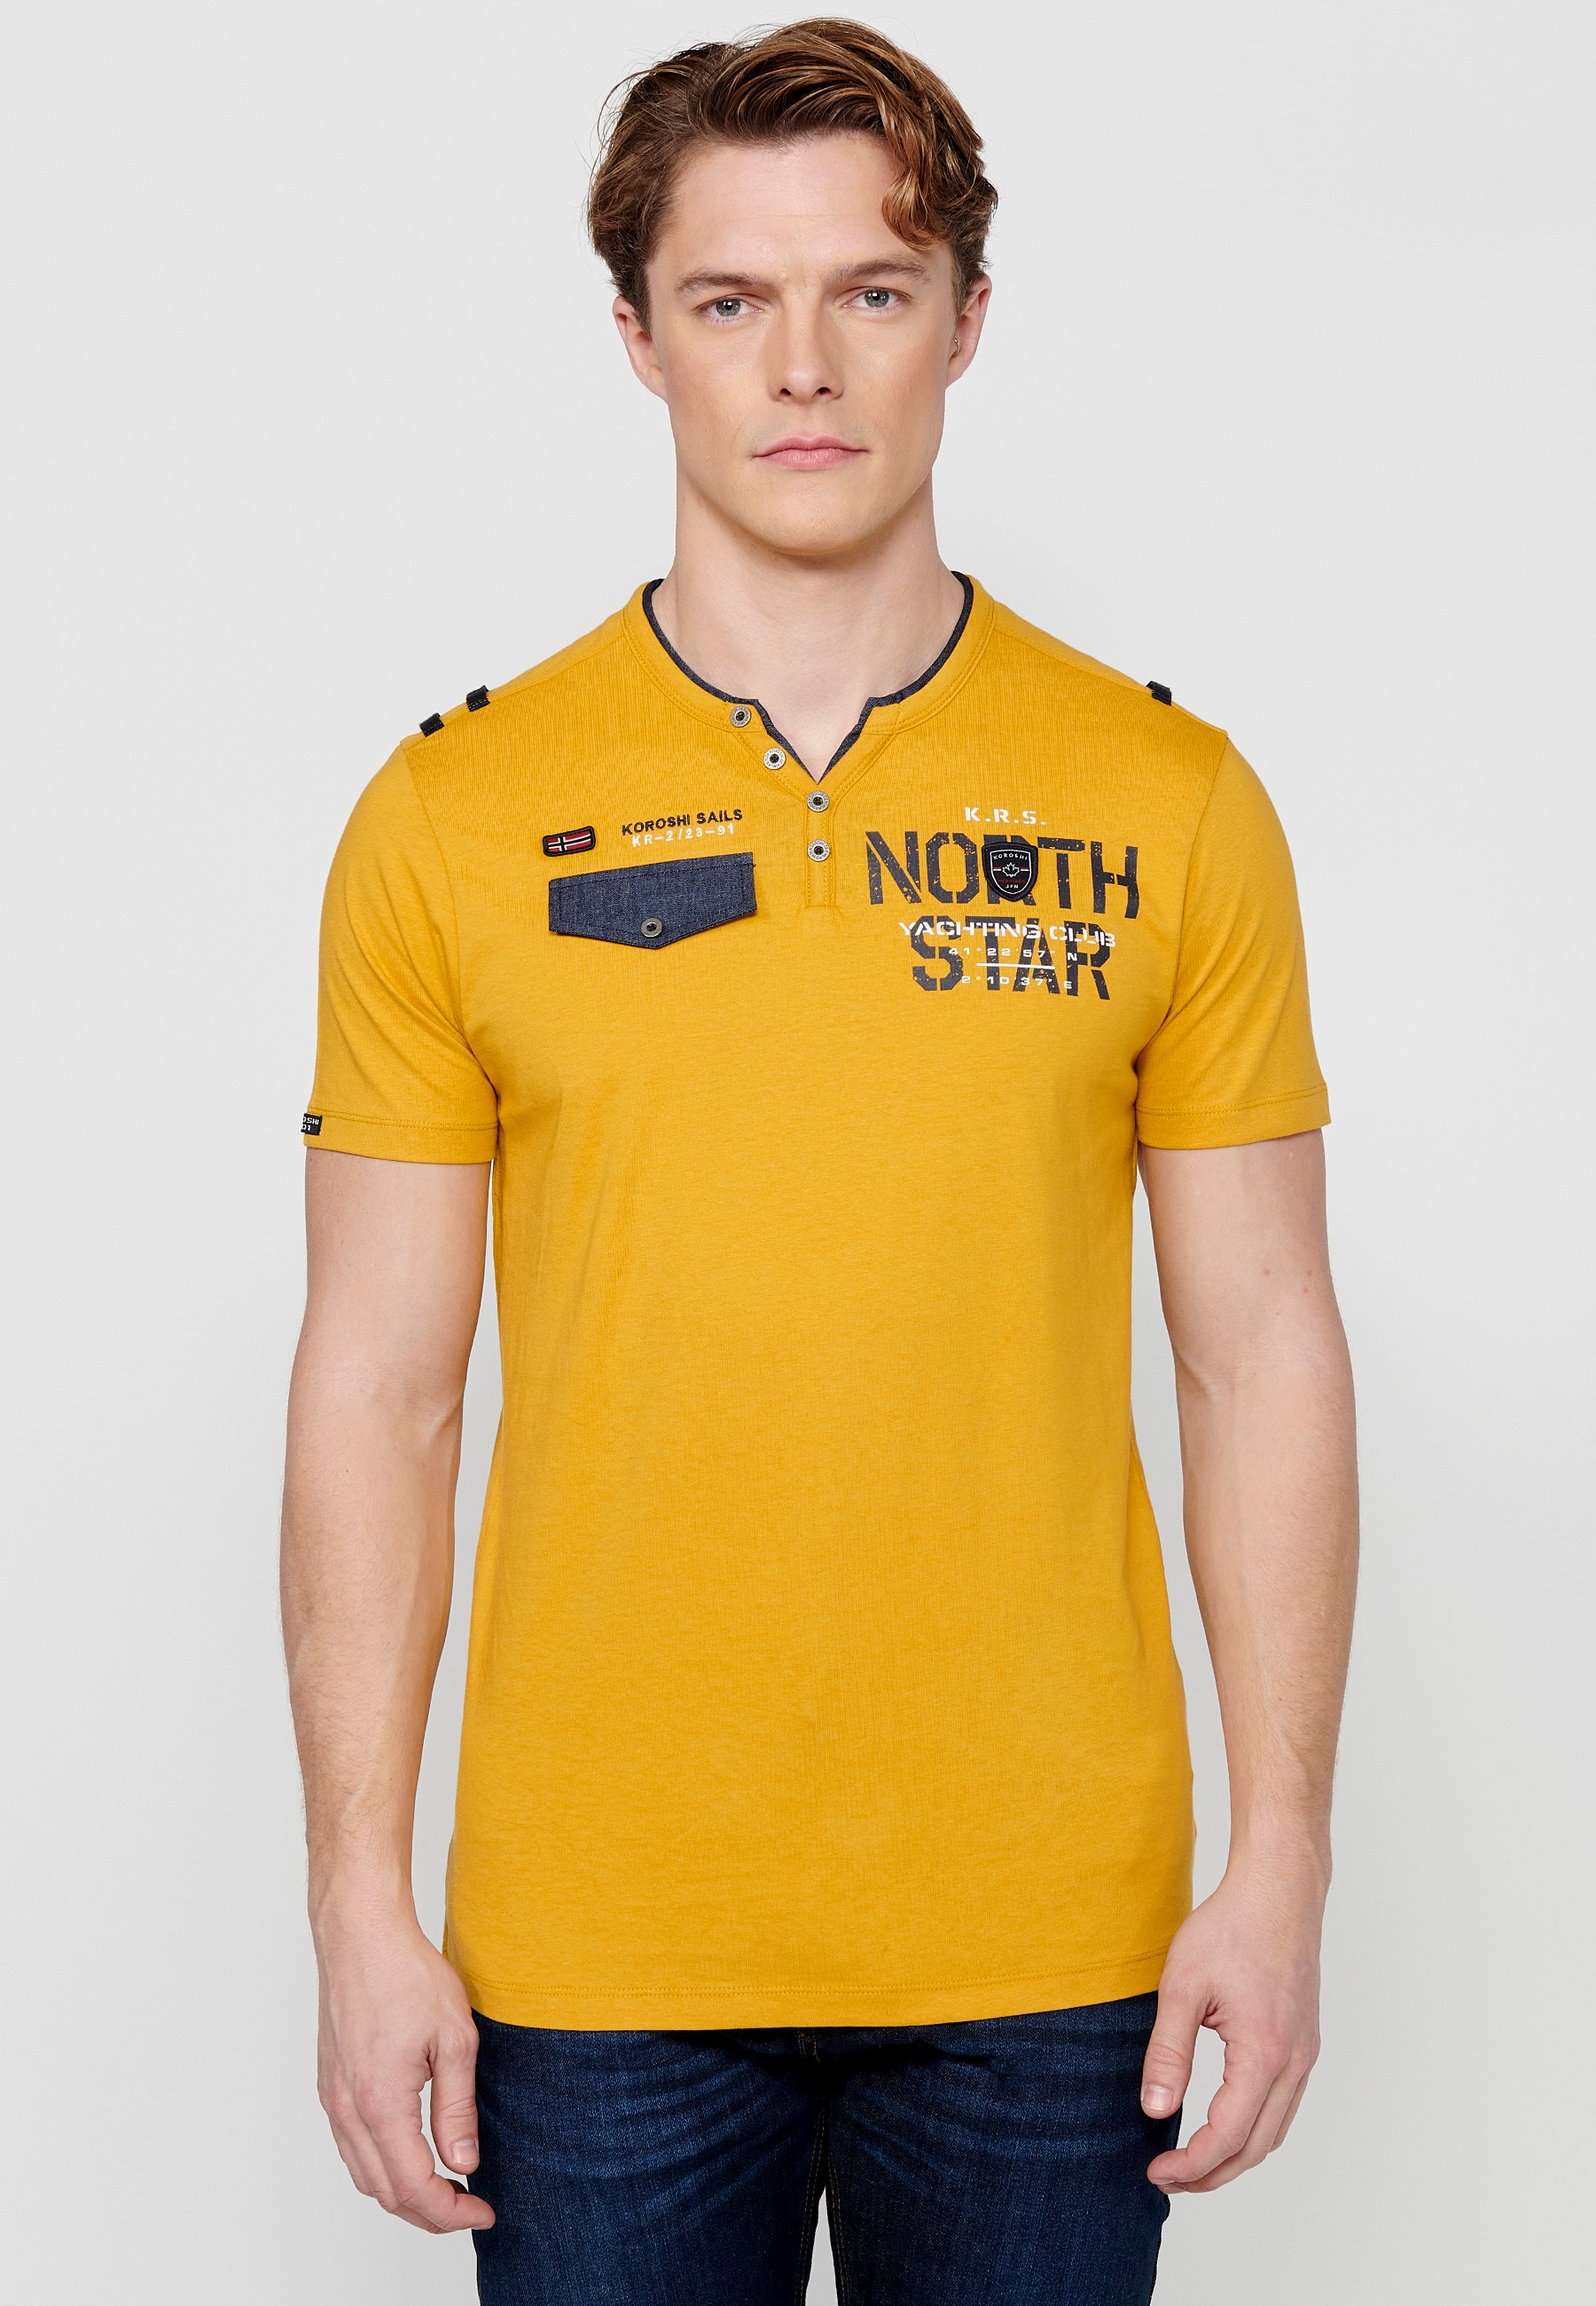 Men's Yellow Short Sleeve Round Neck Cotton T-Shirt with Buttoned Opening 8